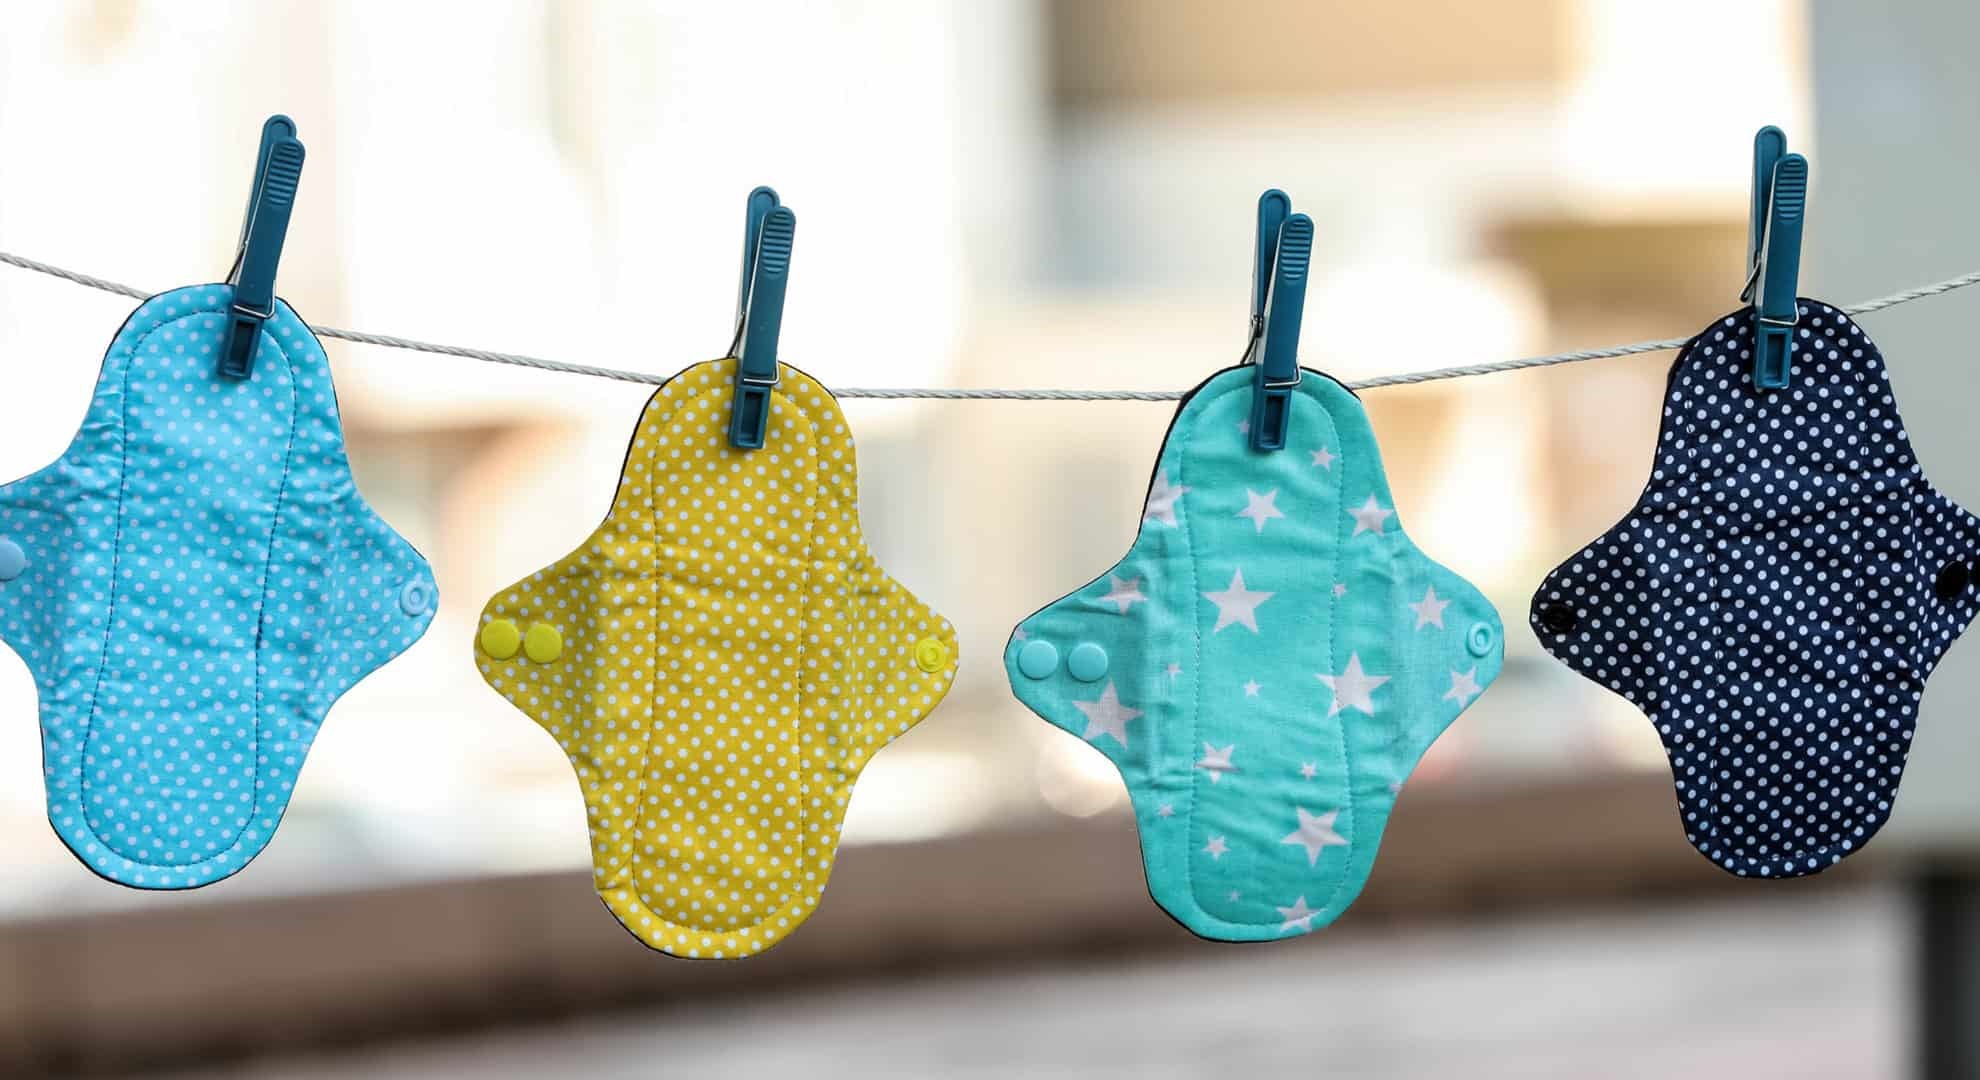 Many different menstrual cloth pads hanging on rope outdoors